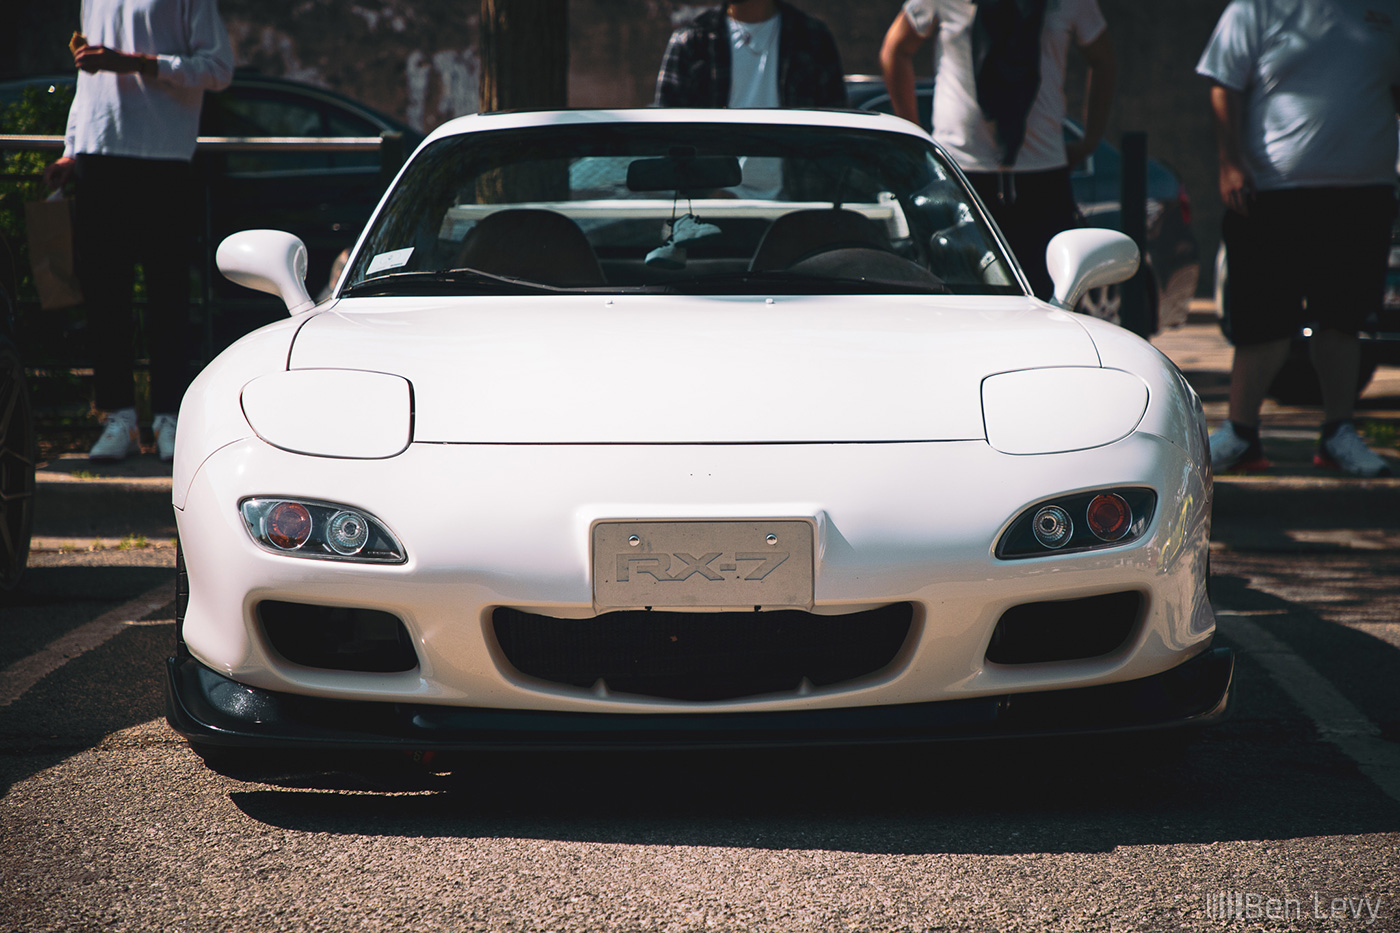 Front of white FD RX-7